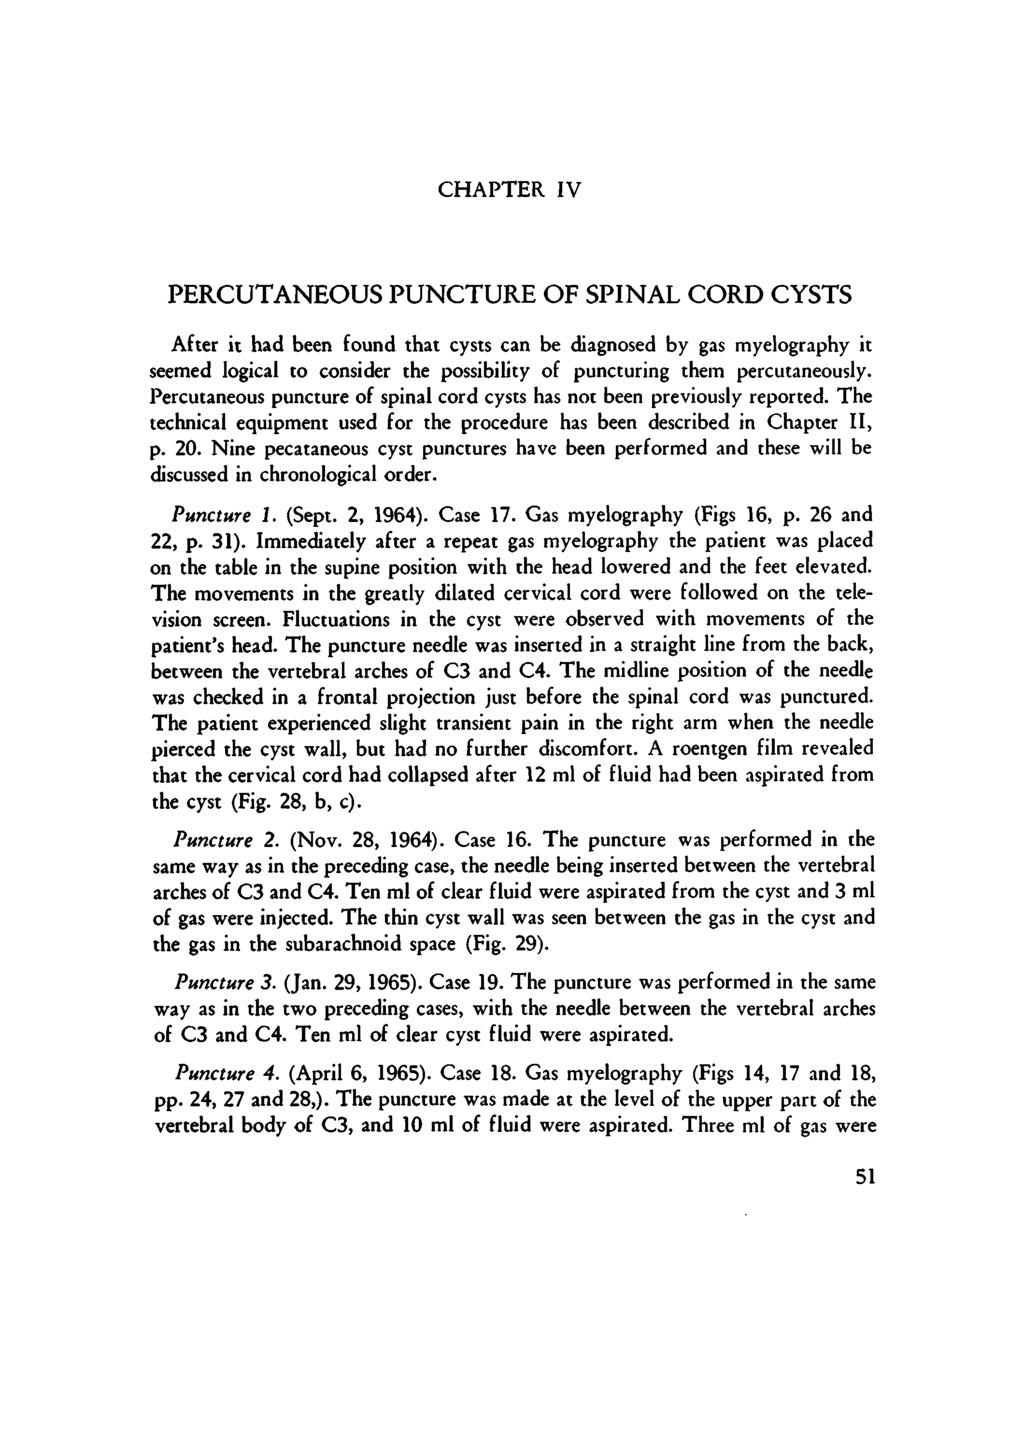 CHAPTER IV PERCUTANEOUS PUNCTURE OF SPINAL CORD CYSTS Downloaded by [37.44.193.